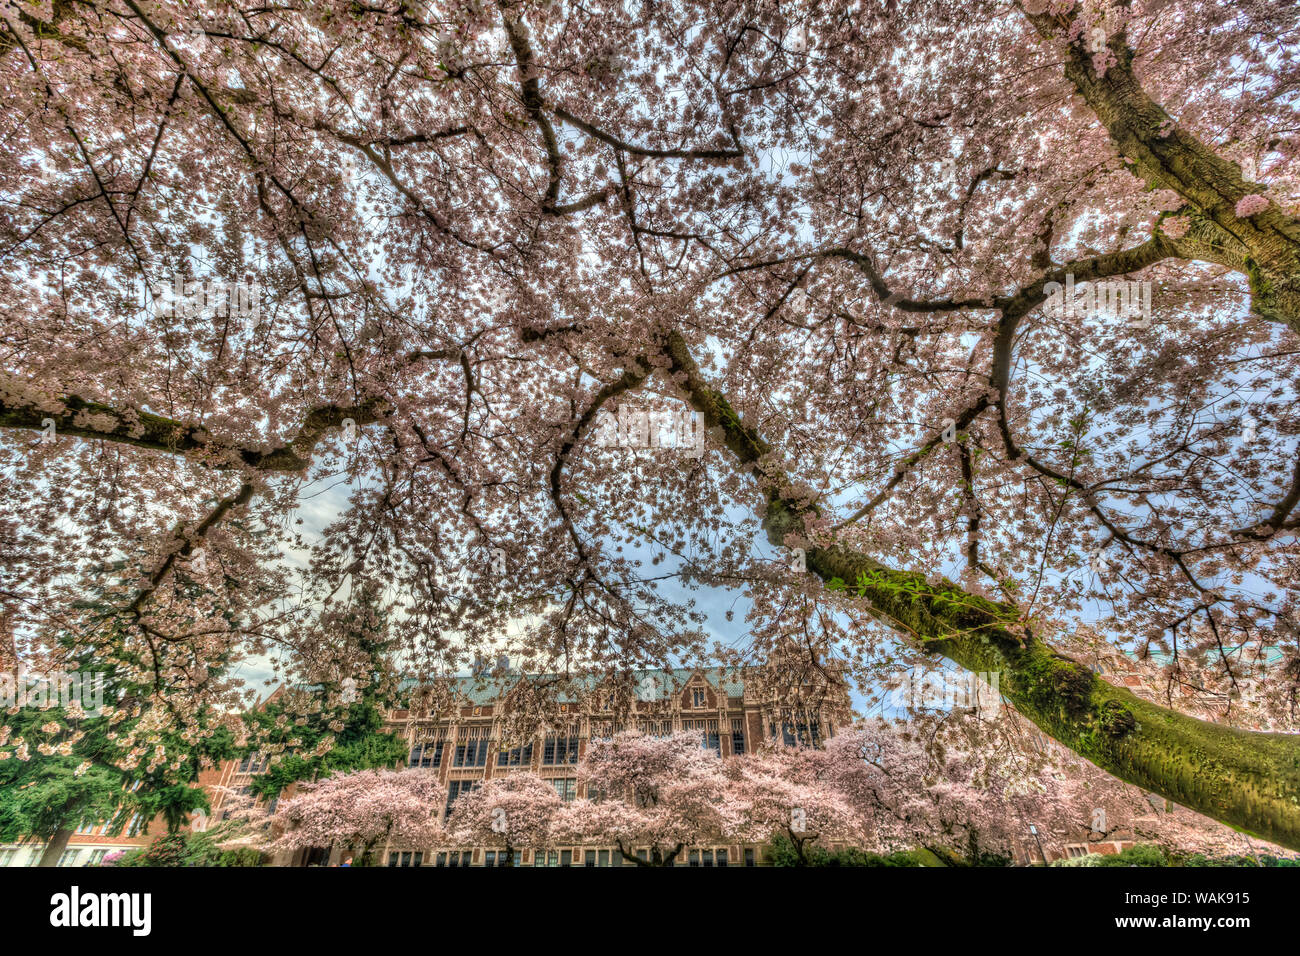 Cherry blossoms in full bloom at University of Washington campus, Seattle, Washington State, USA. (Editorial Use Only) Stock Photo